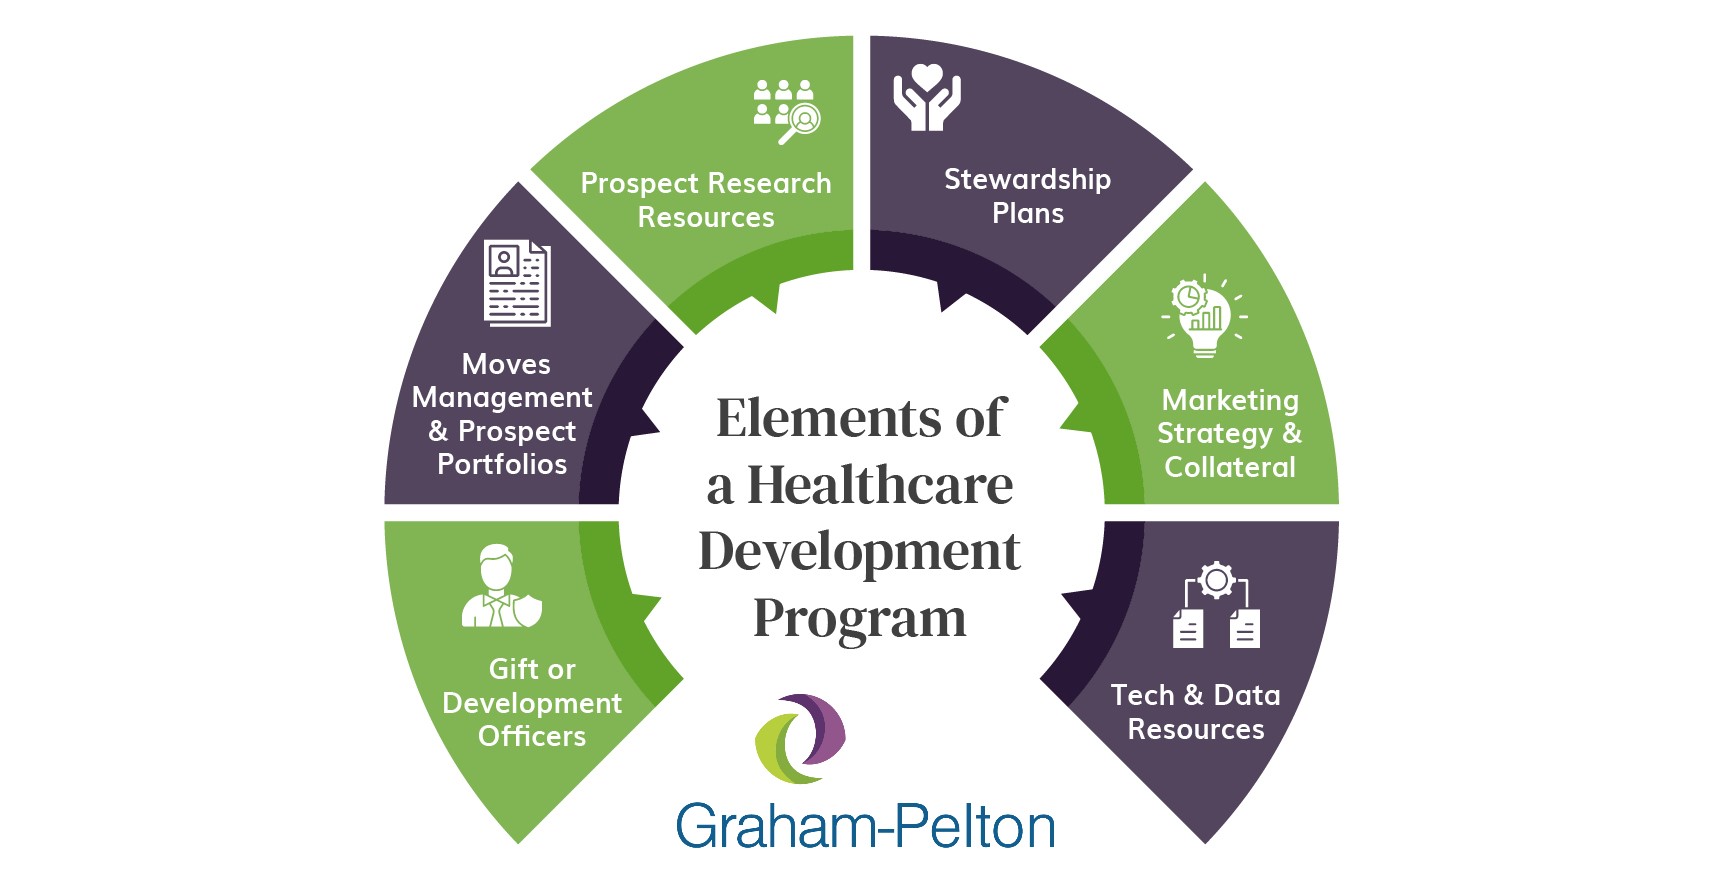 The key components of a healthcare development program, detailed in the text below